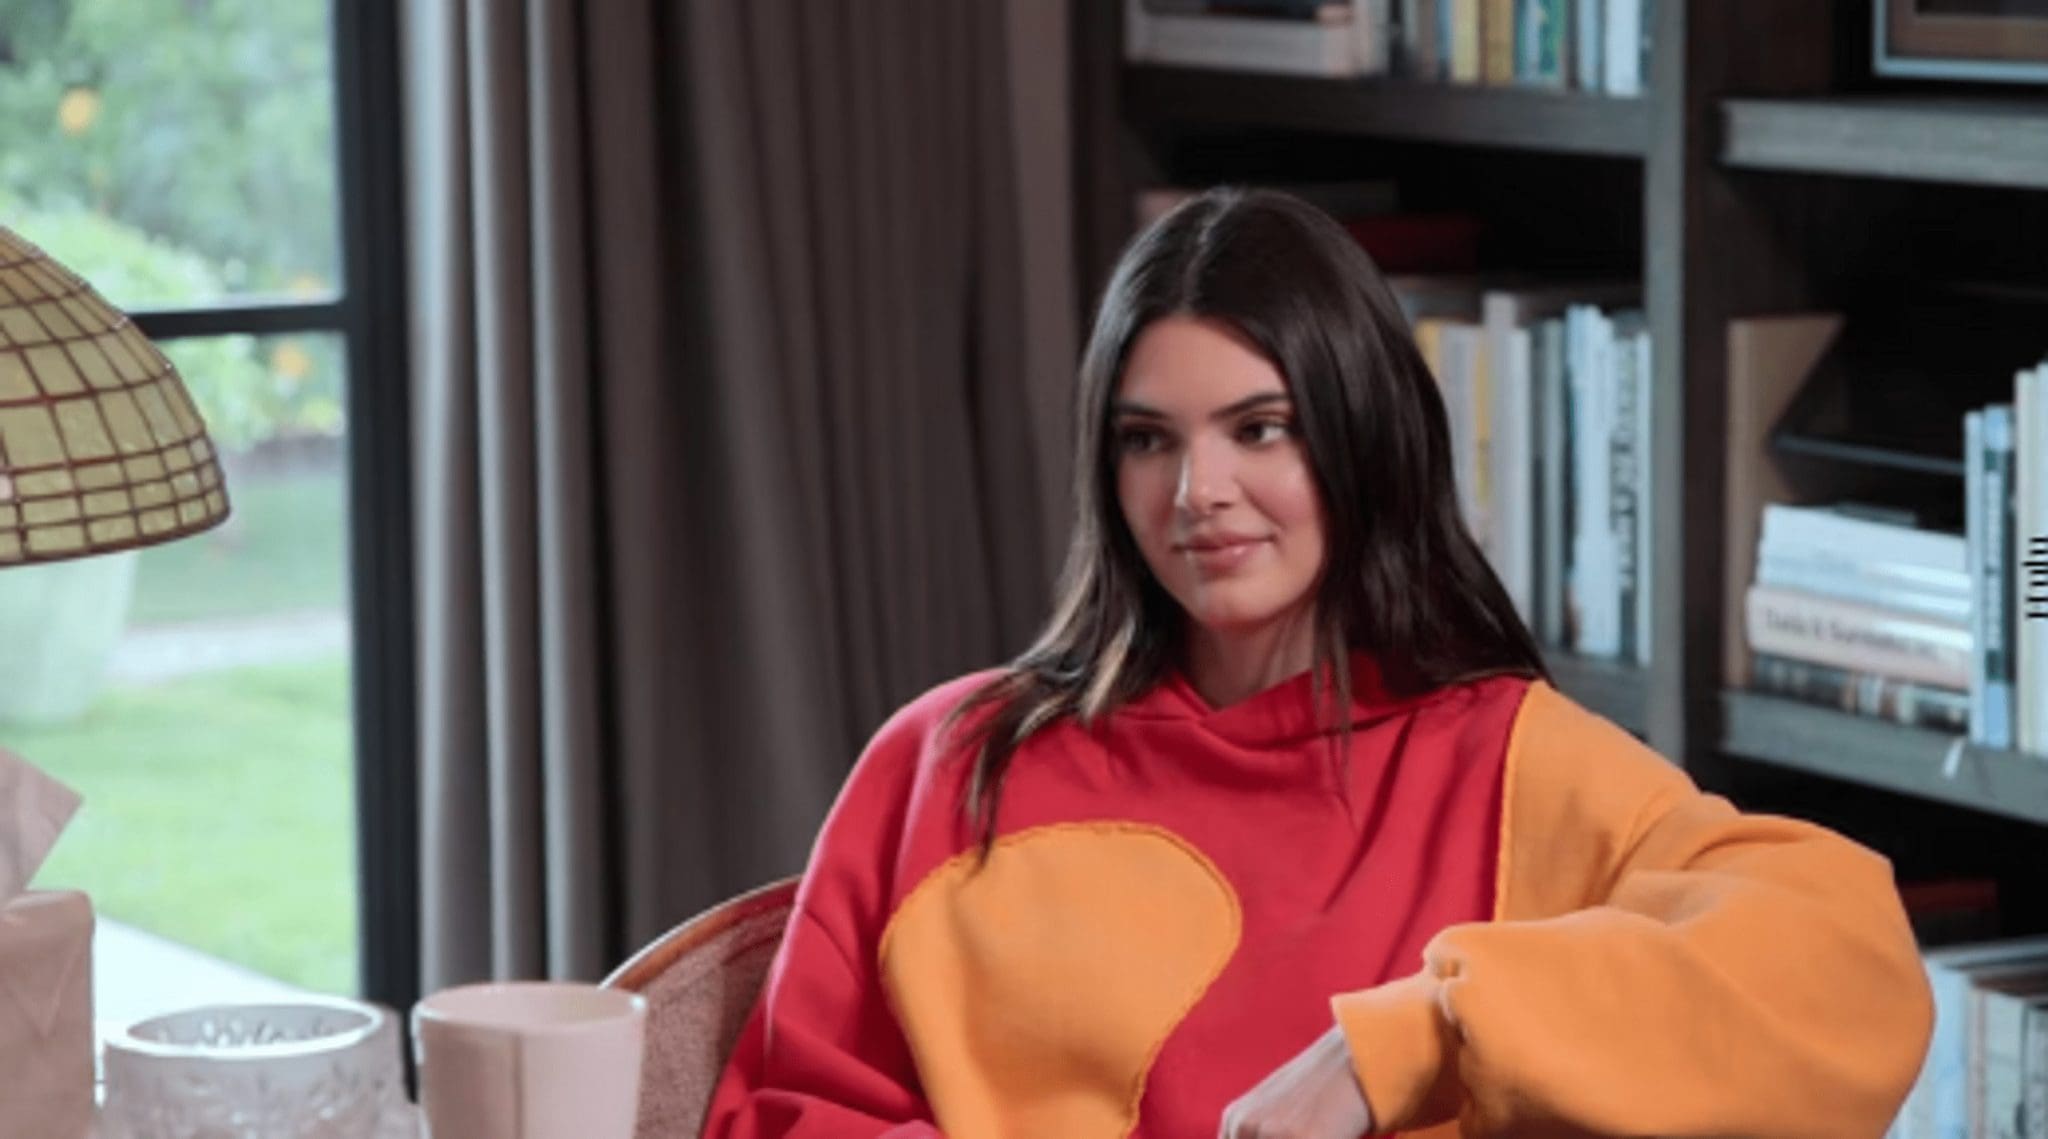 Kendall Jenner admitted that she was not yet ready to have children